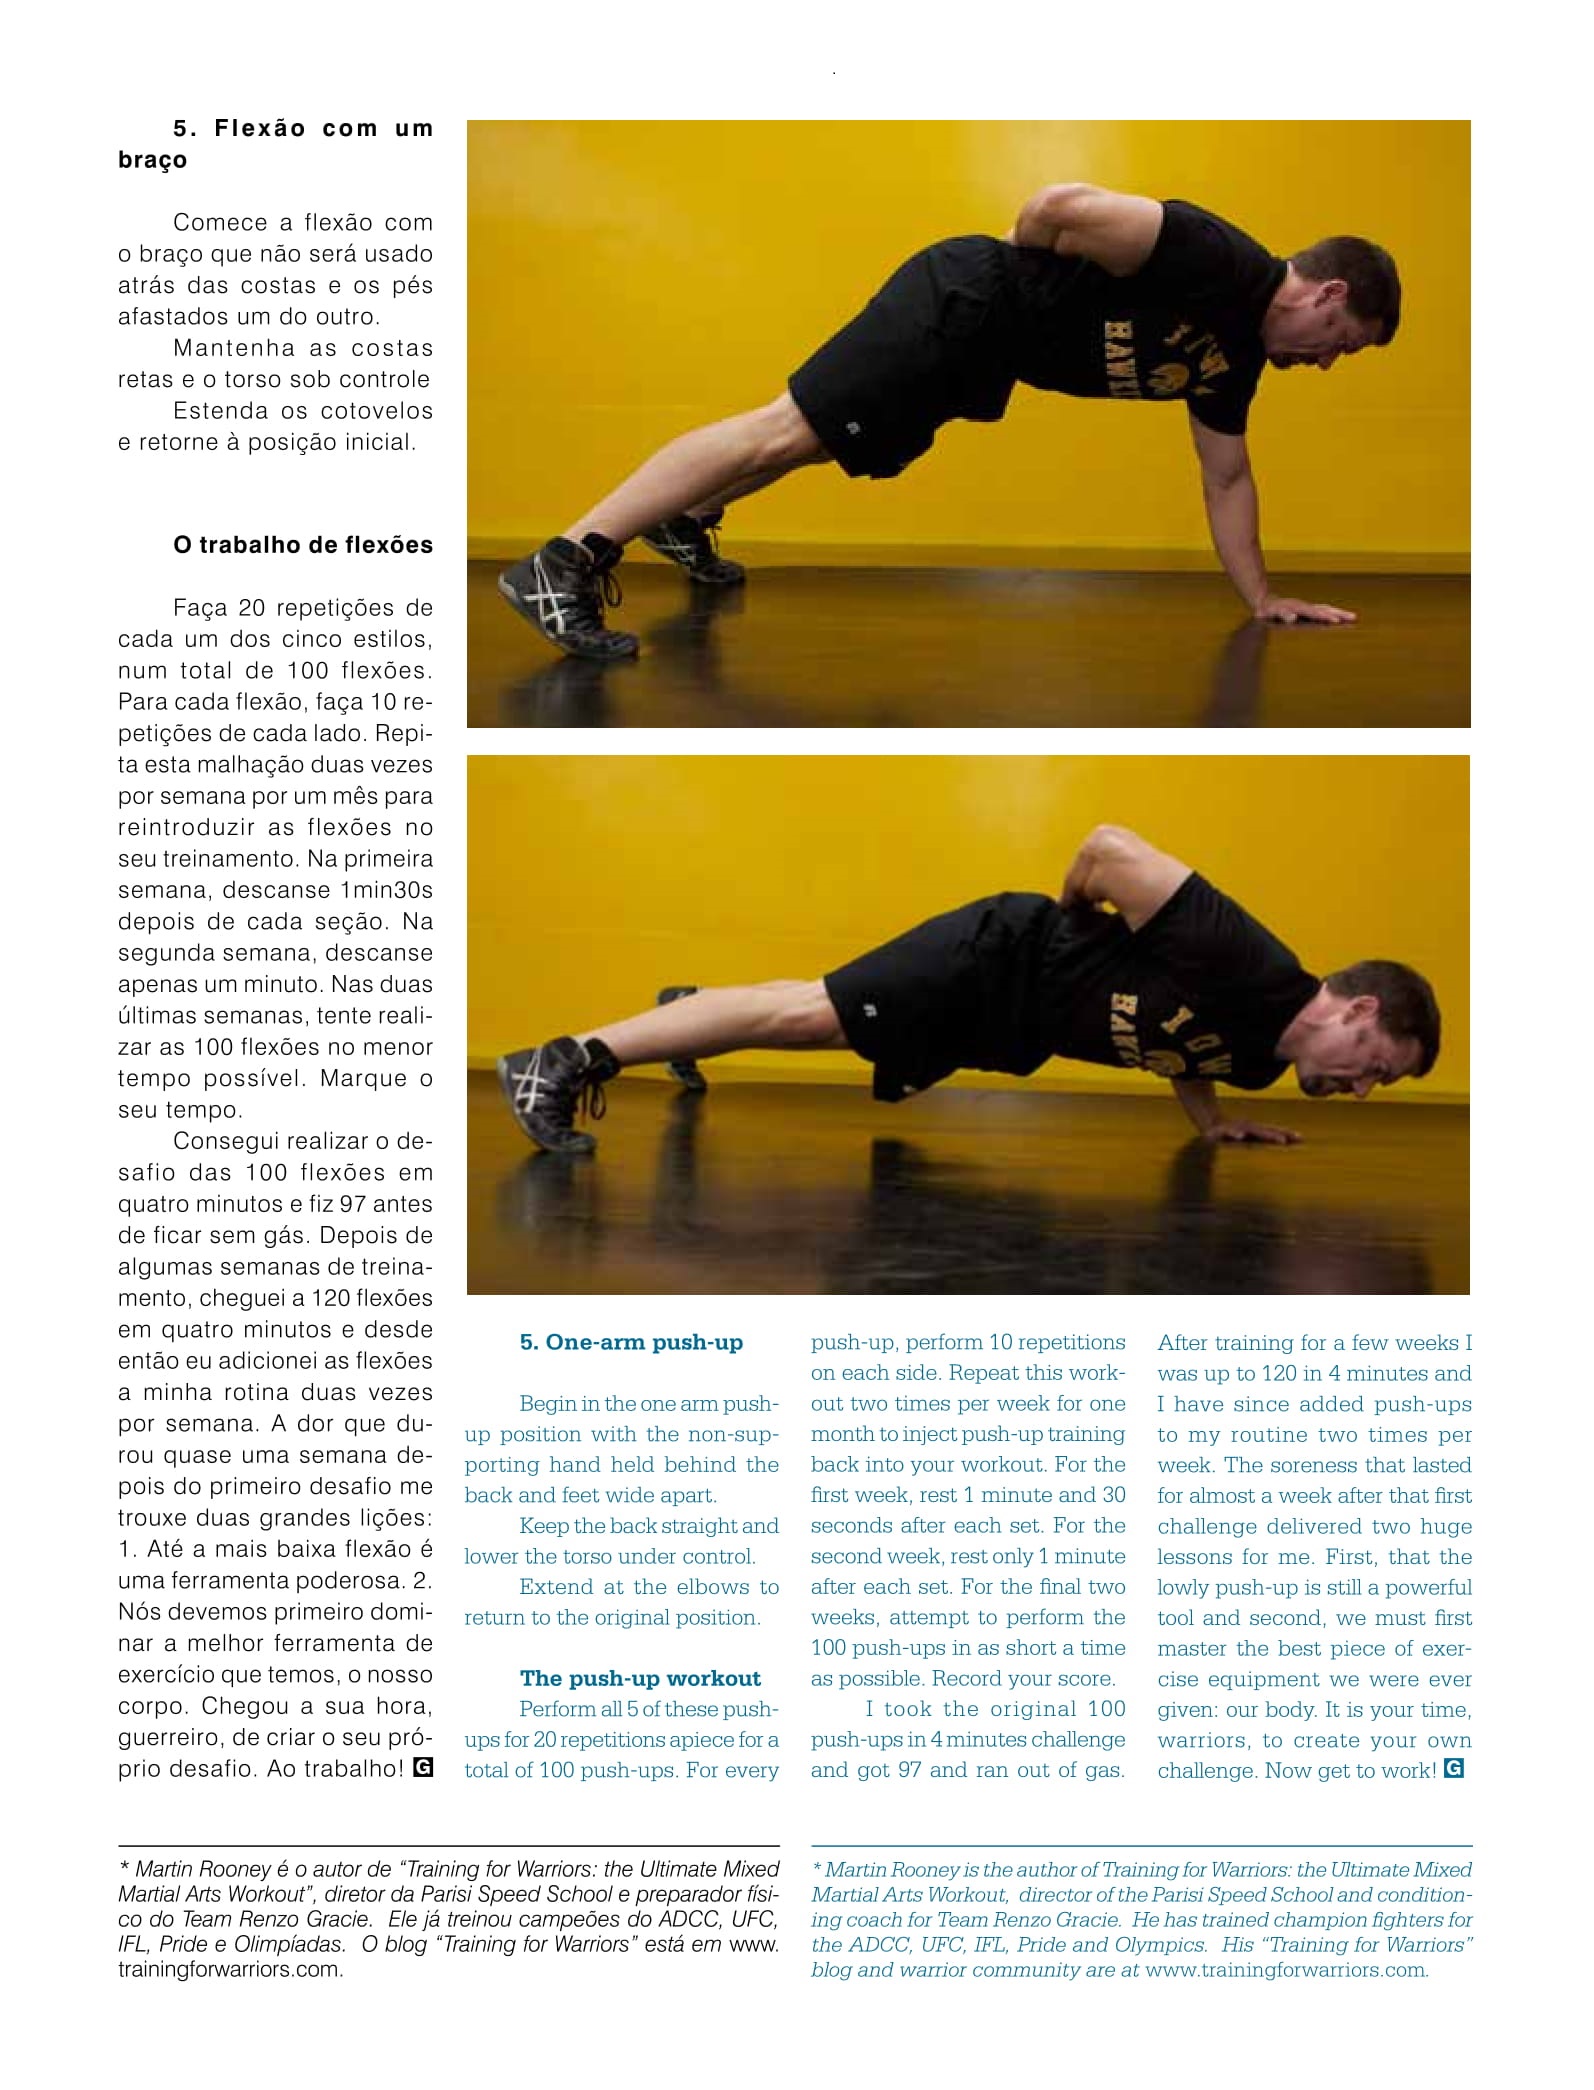 Training For Warriors: Get The Most Out Of Your Push-Ups | Graciemag